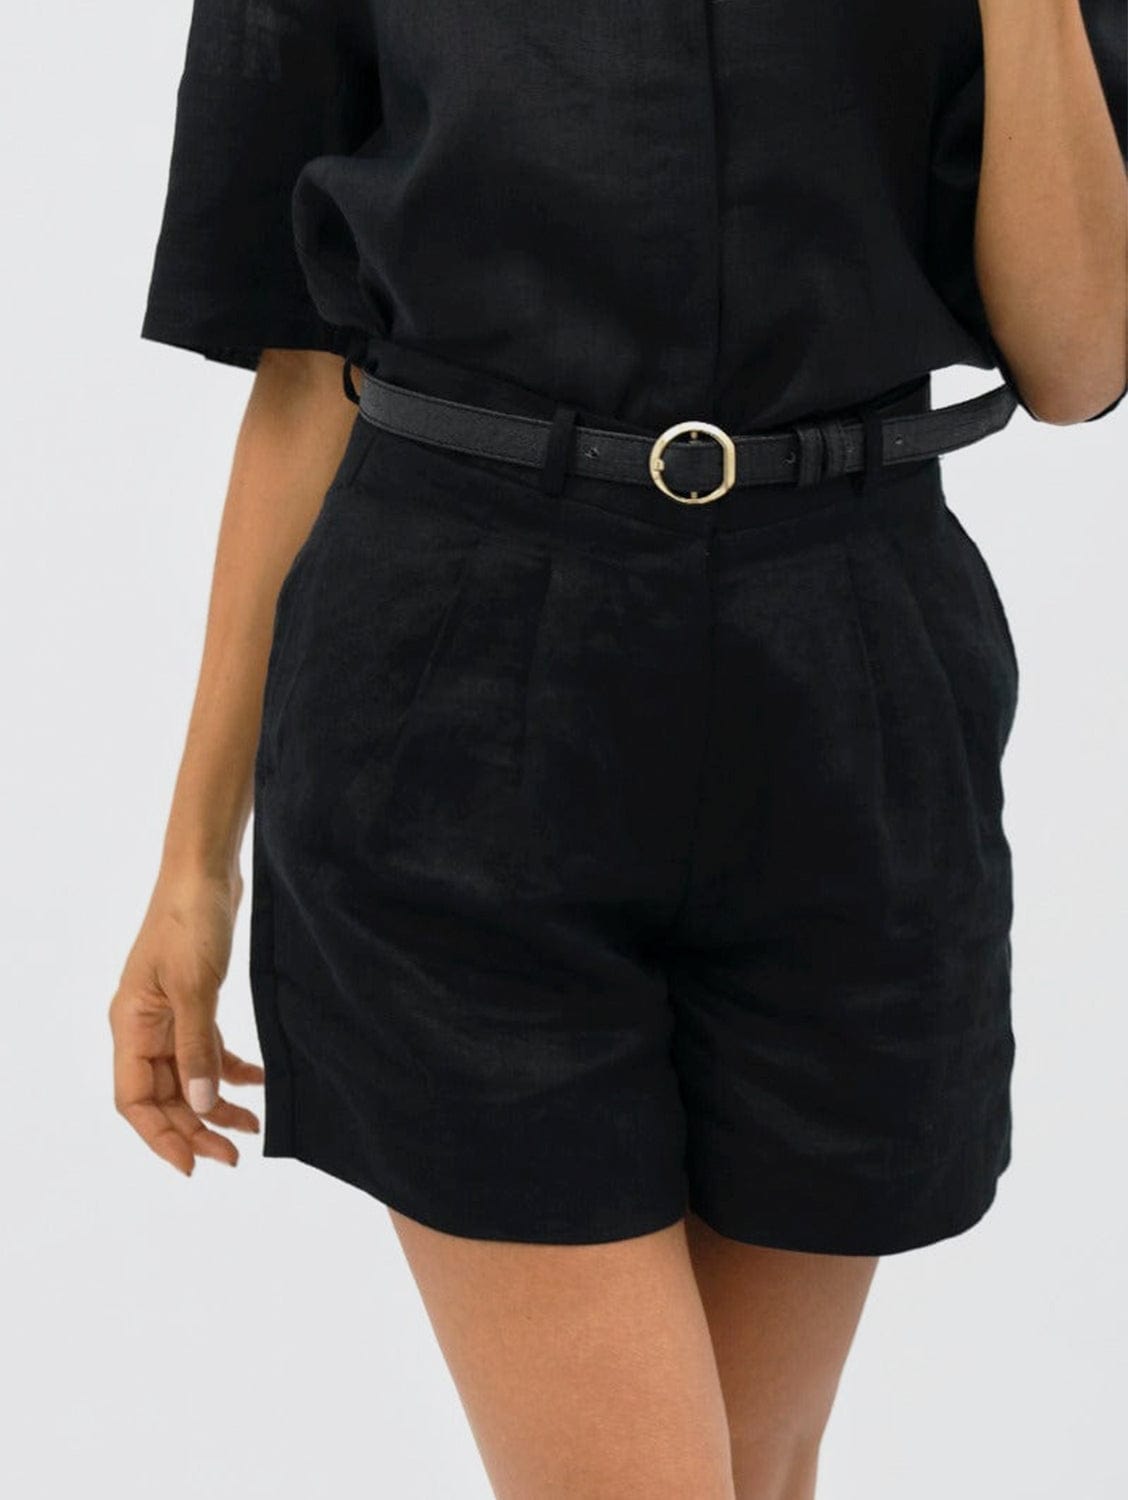 1 People French Riviera NCE - Mom Shorts - Licorice XS